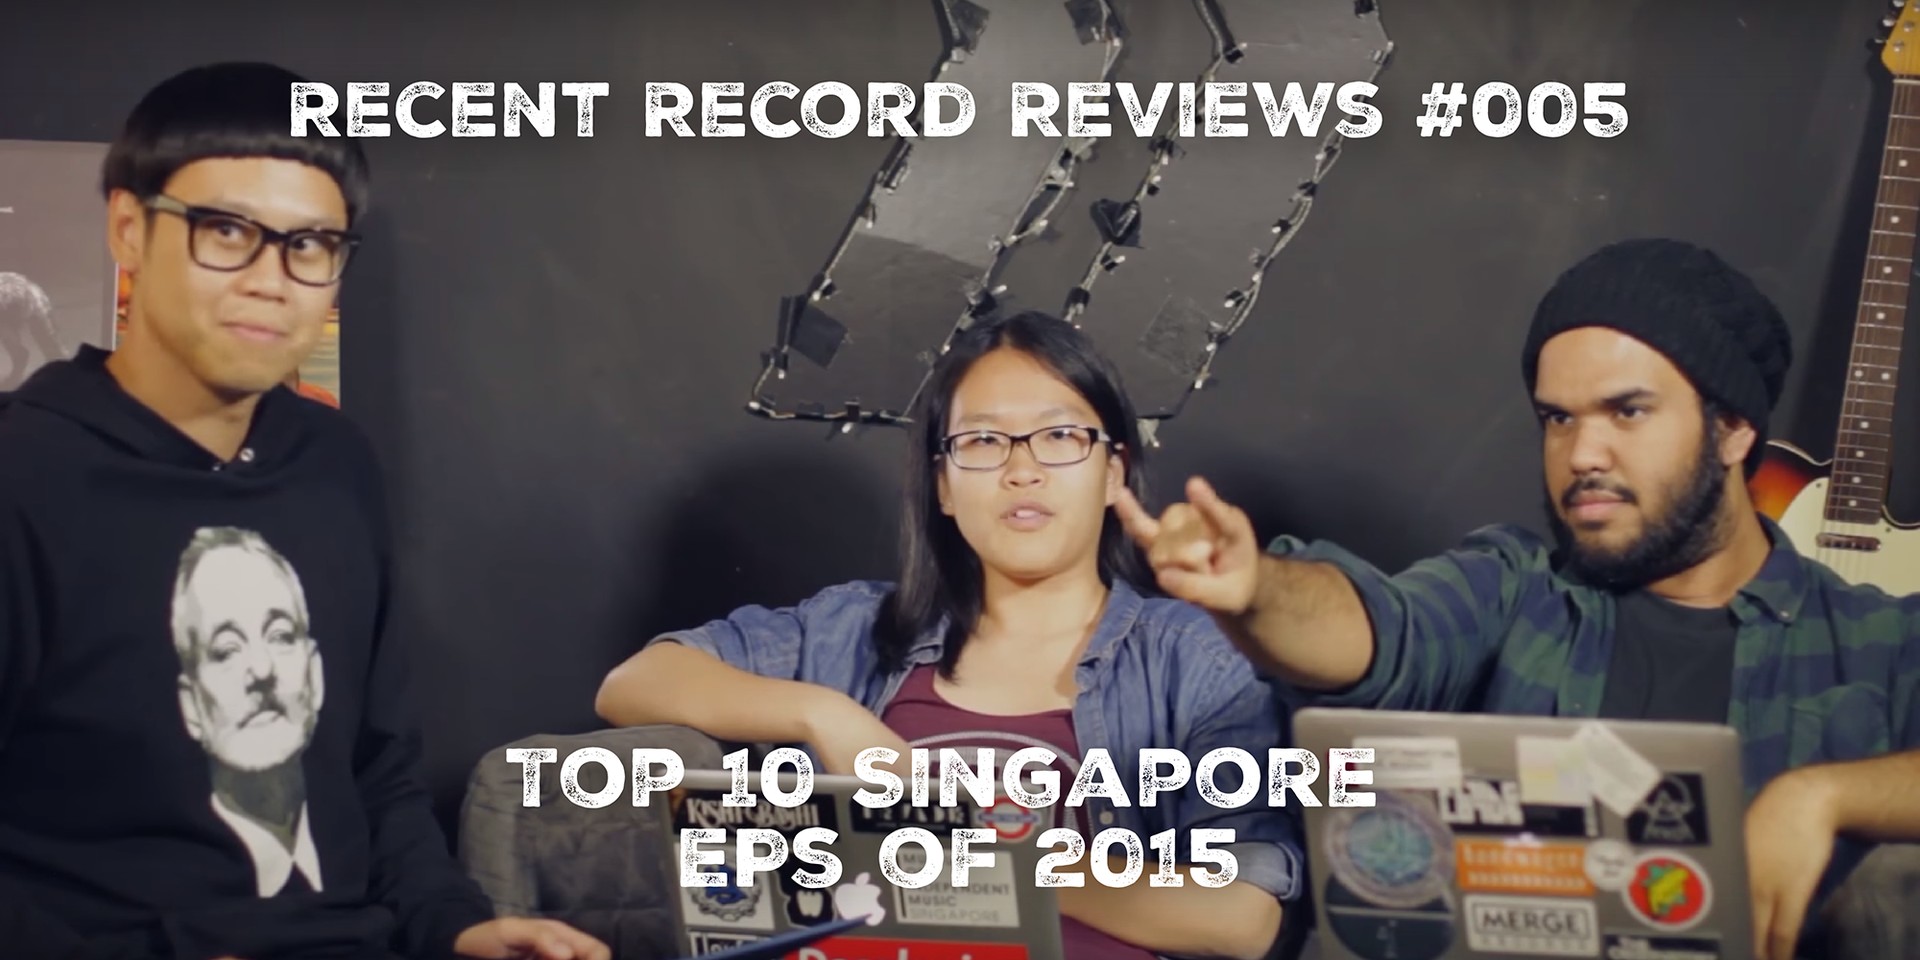 WATCH: Bandwagon Recent Record Reviews #005 - Top 10 Singapore EPs of 2015